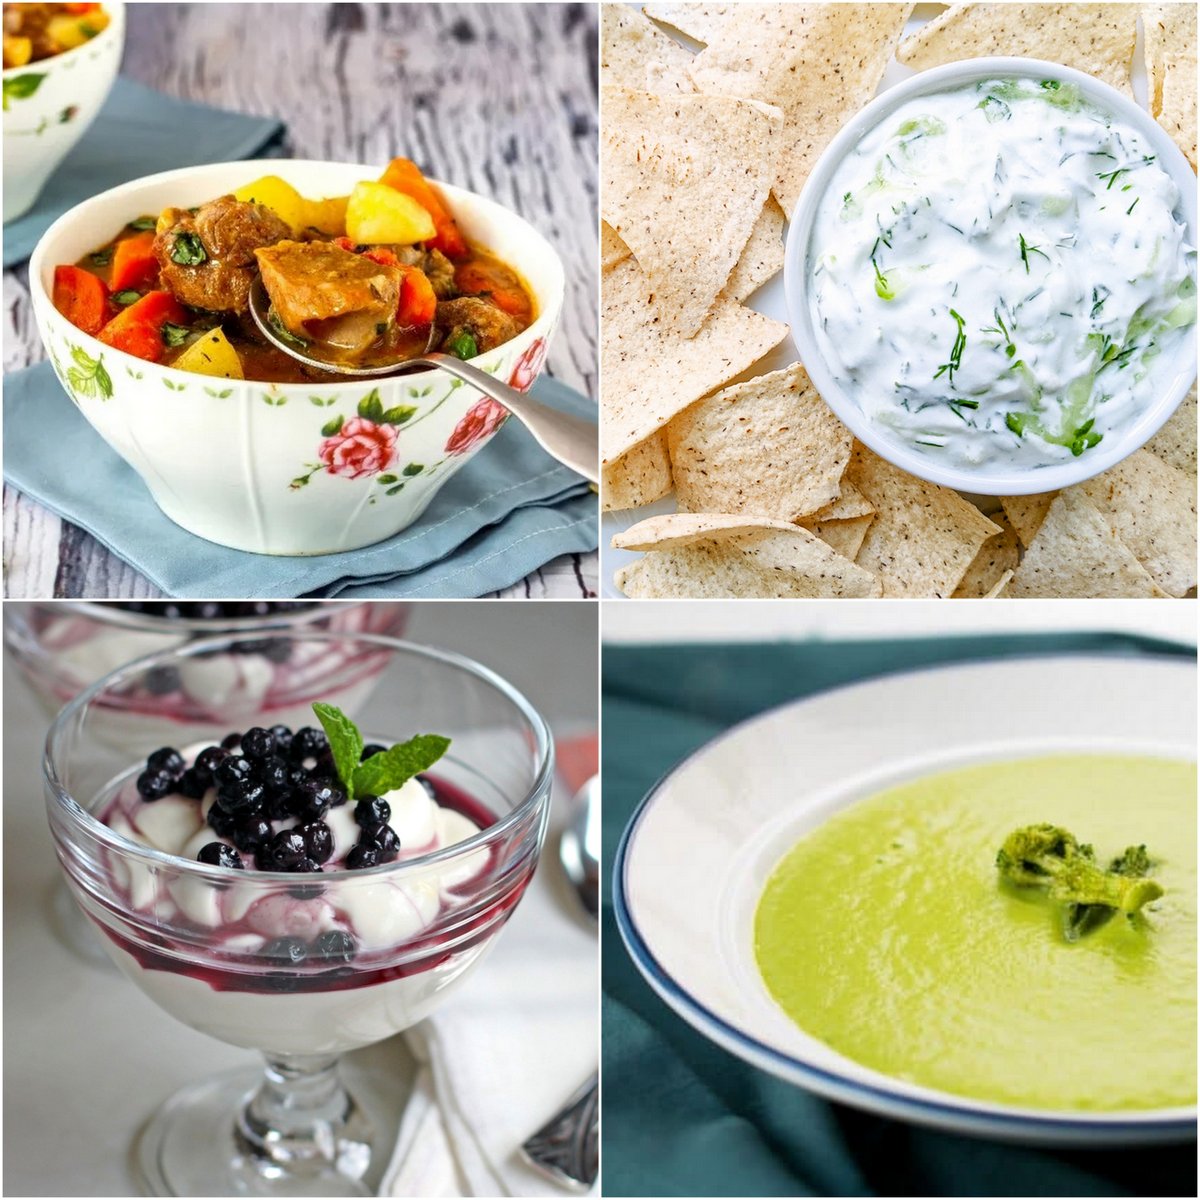 Paleo AIP Recipe Roundtable #403 | Phoenix Helix - *Featured Recipes: Lamb and Root Veggie Stew, 5-Ingredient Tzatziki, Creamy Asparagus Soup, and Blueberries and Lemon Cream.